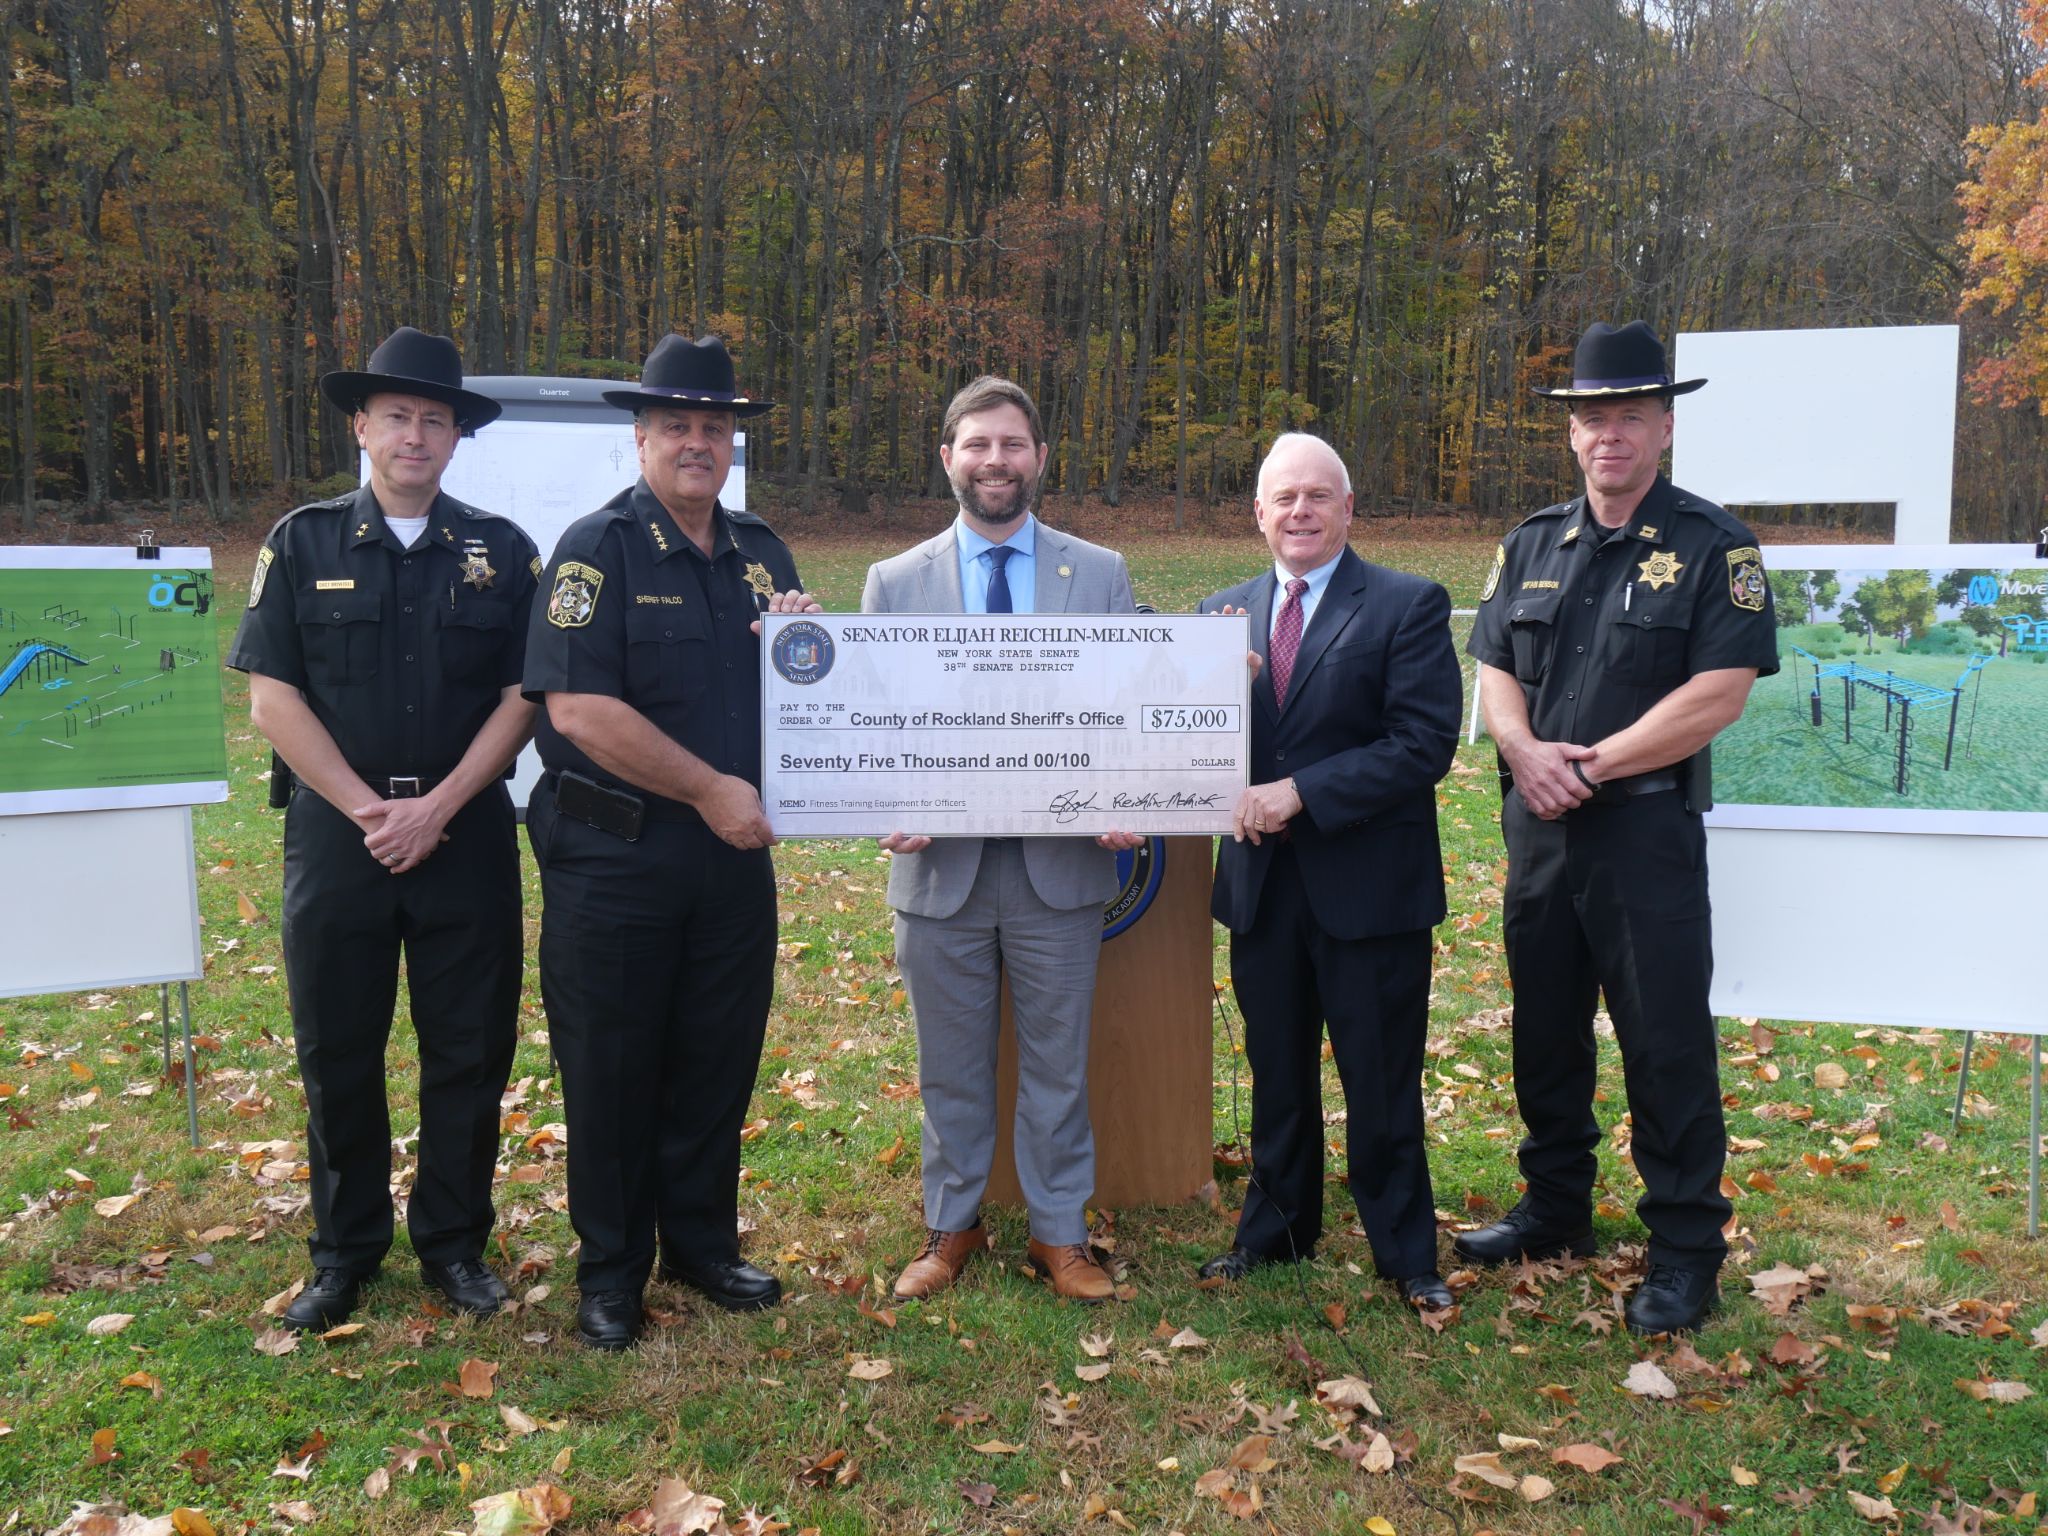 ReichlinMelnick Secures Grant to Support Rockland Police Academy